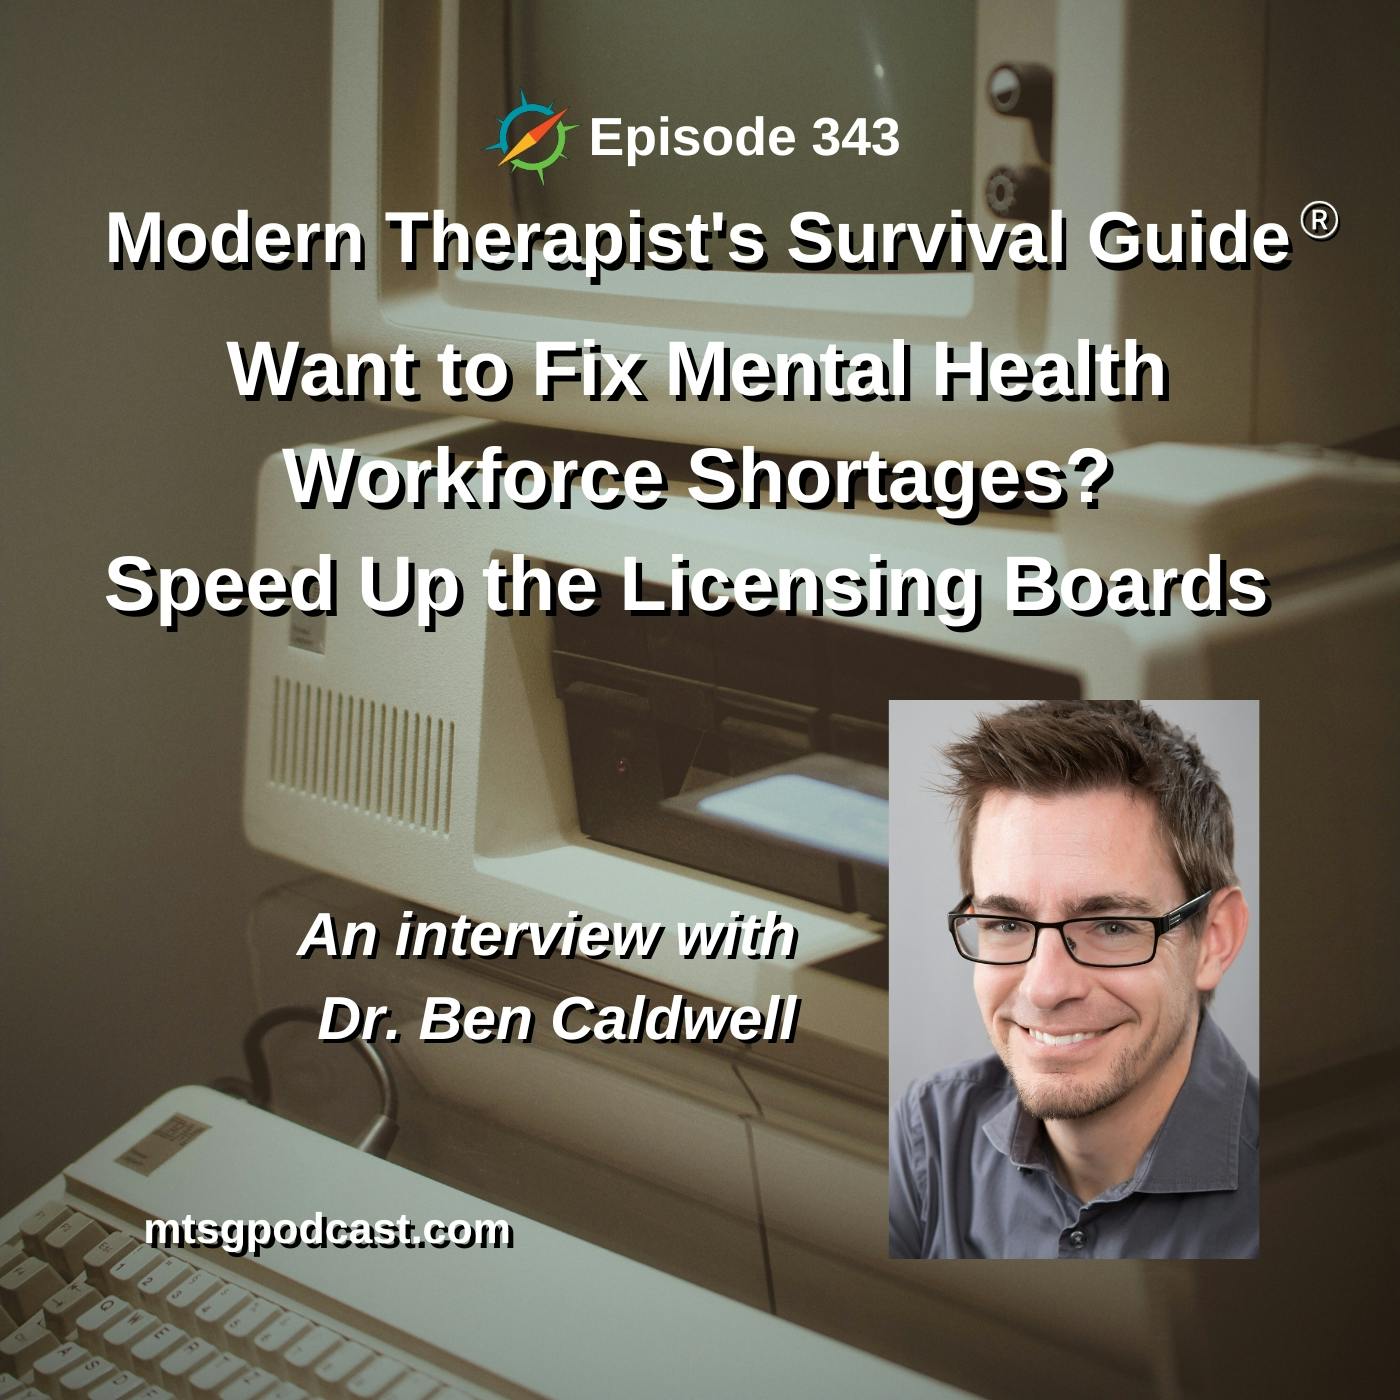 Want to Fix Mental Health Workforce Shortages? Speed up the Licensing Boards: An interview with Dr. Ben Caldwell